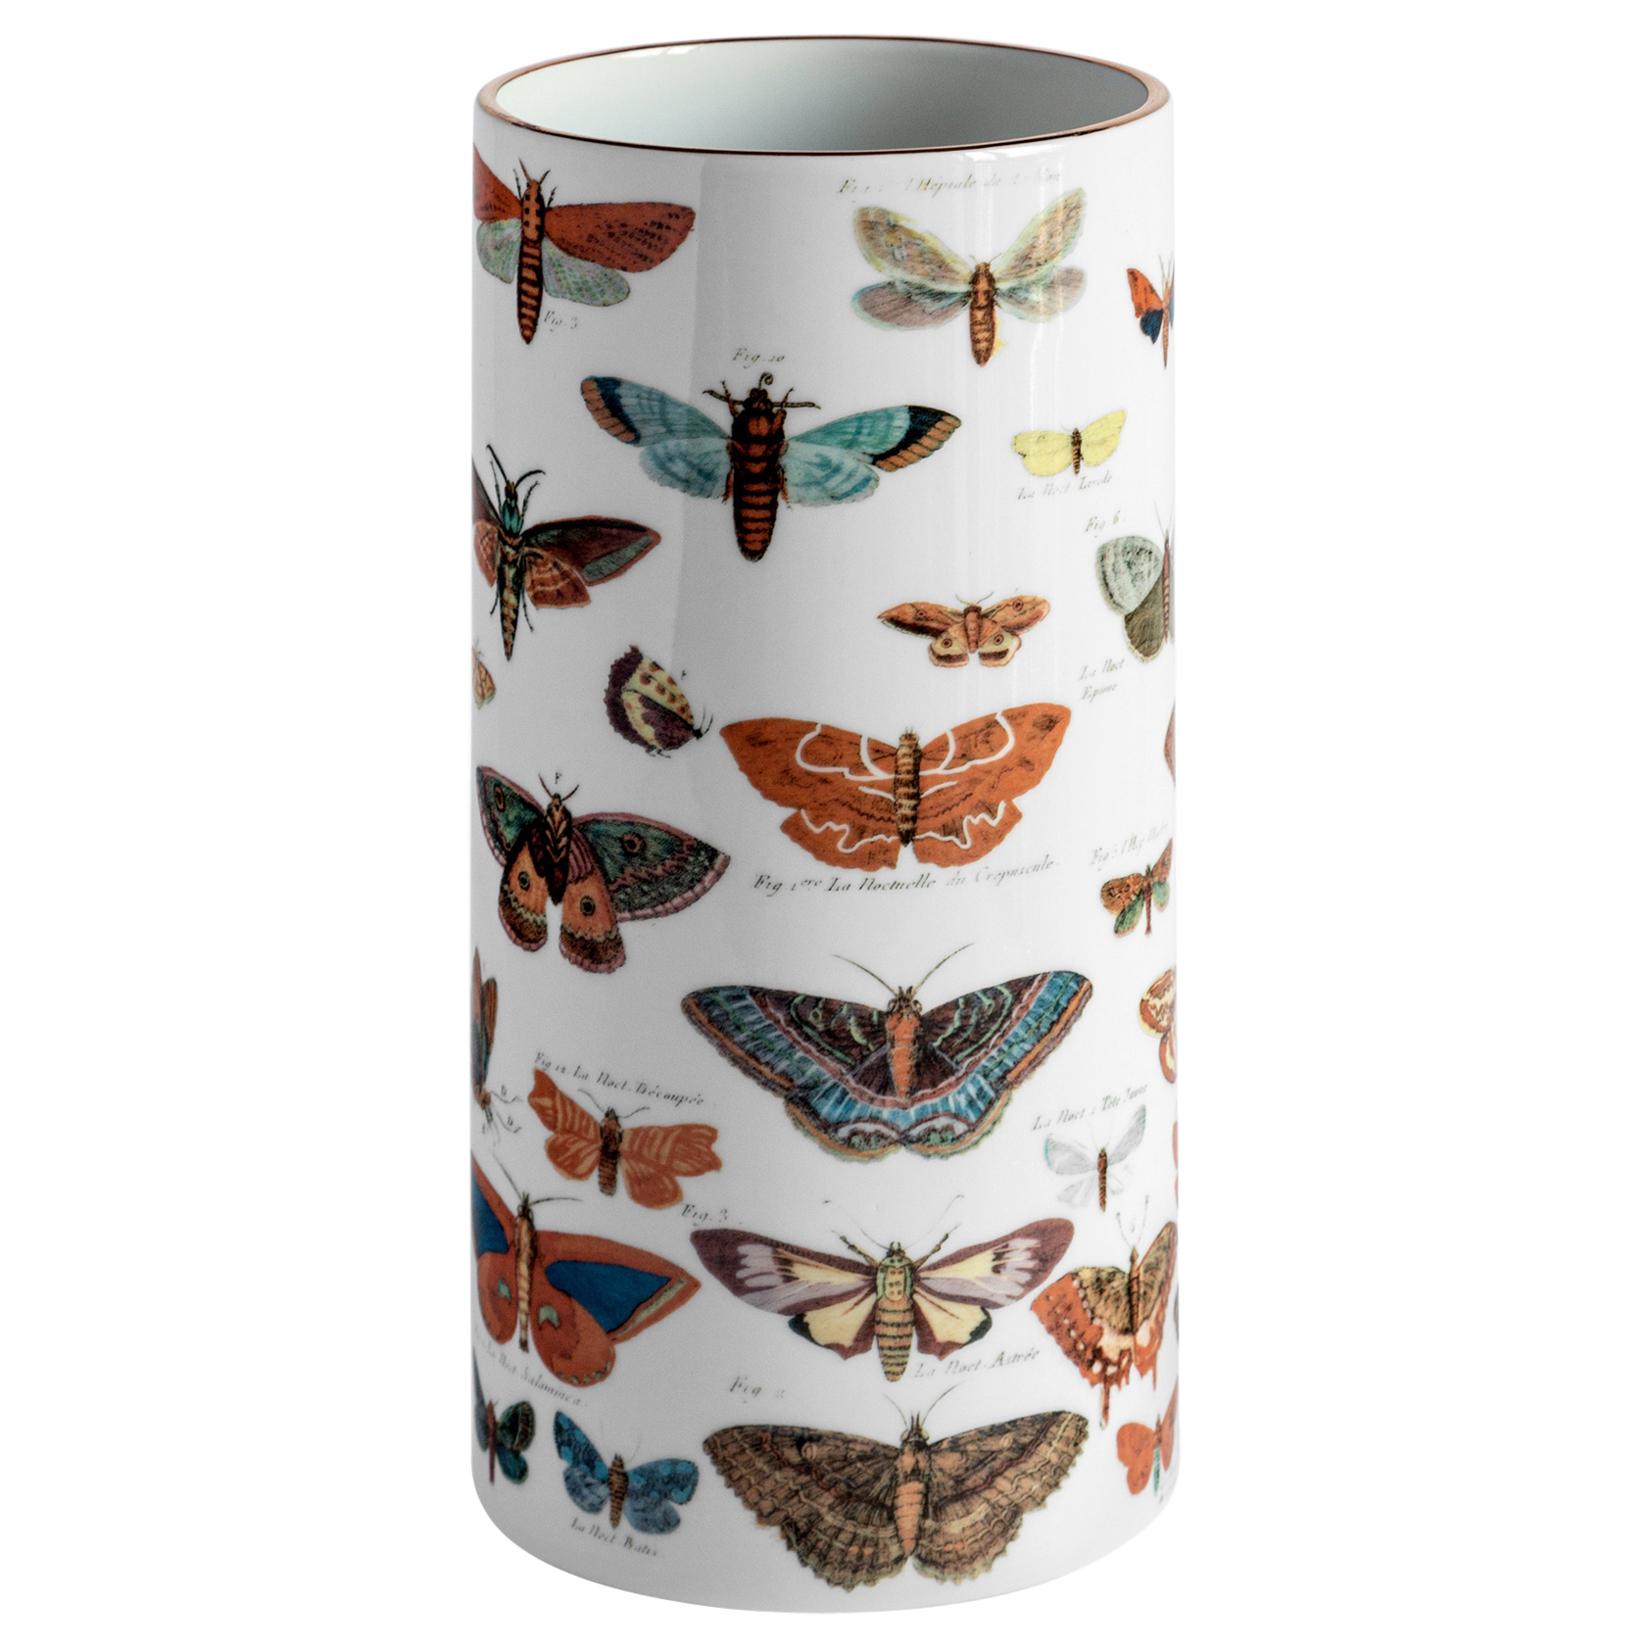 Butterflies, Contemporary Porcelain Vase with Decorative Design by Vito Nesta For Sale